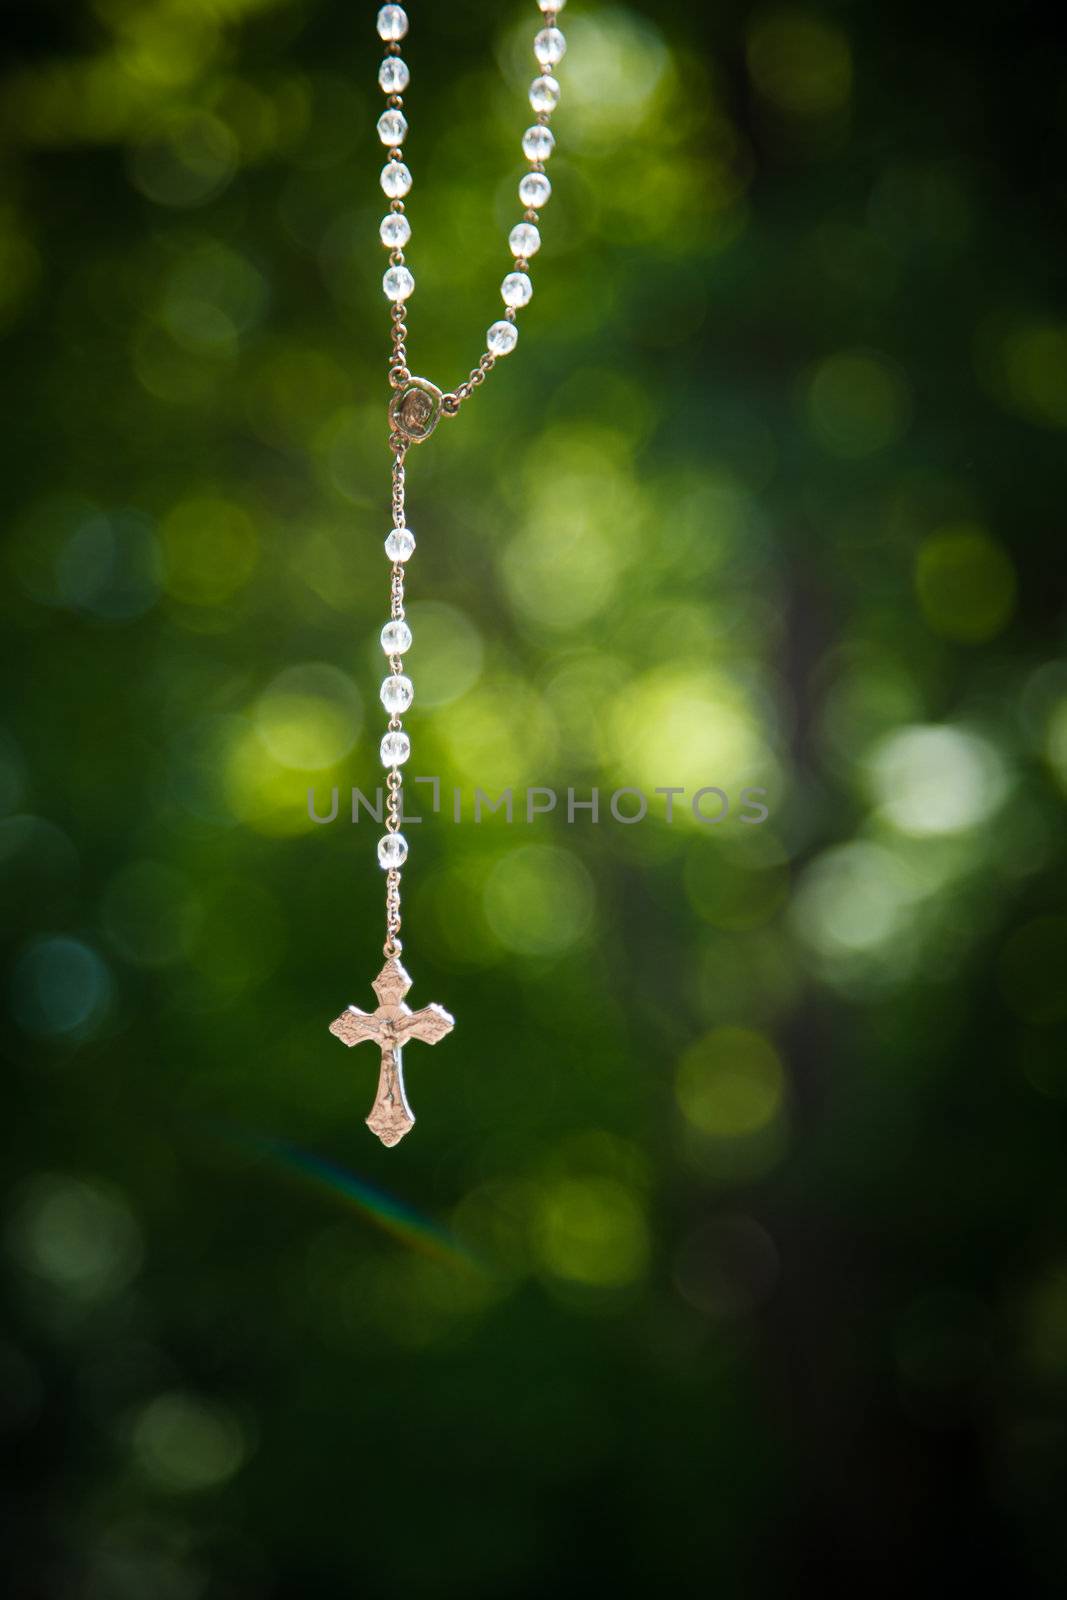 Crucifix hanged outside to pray for good weather on a wedding day